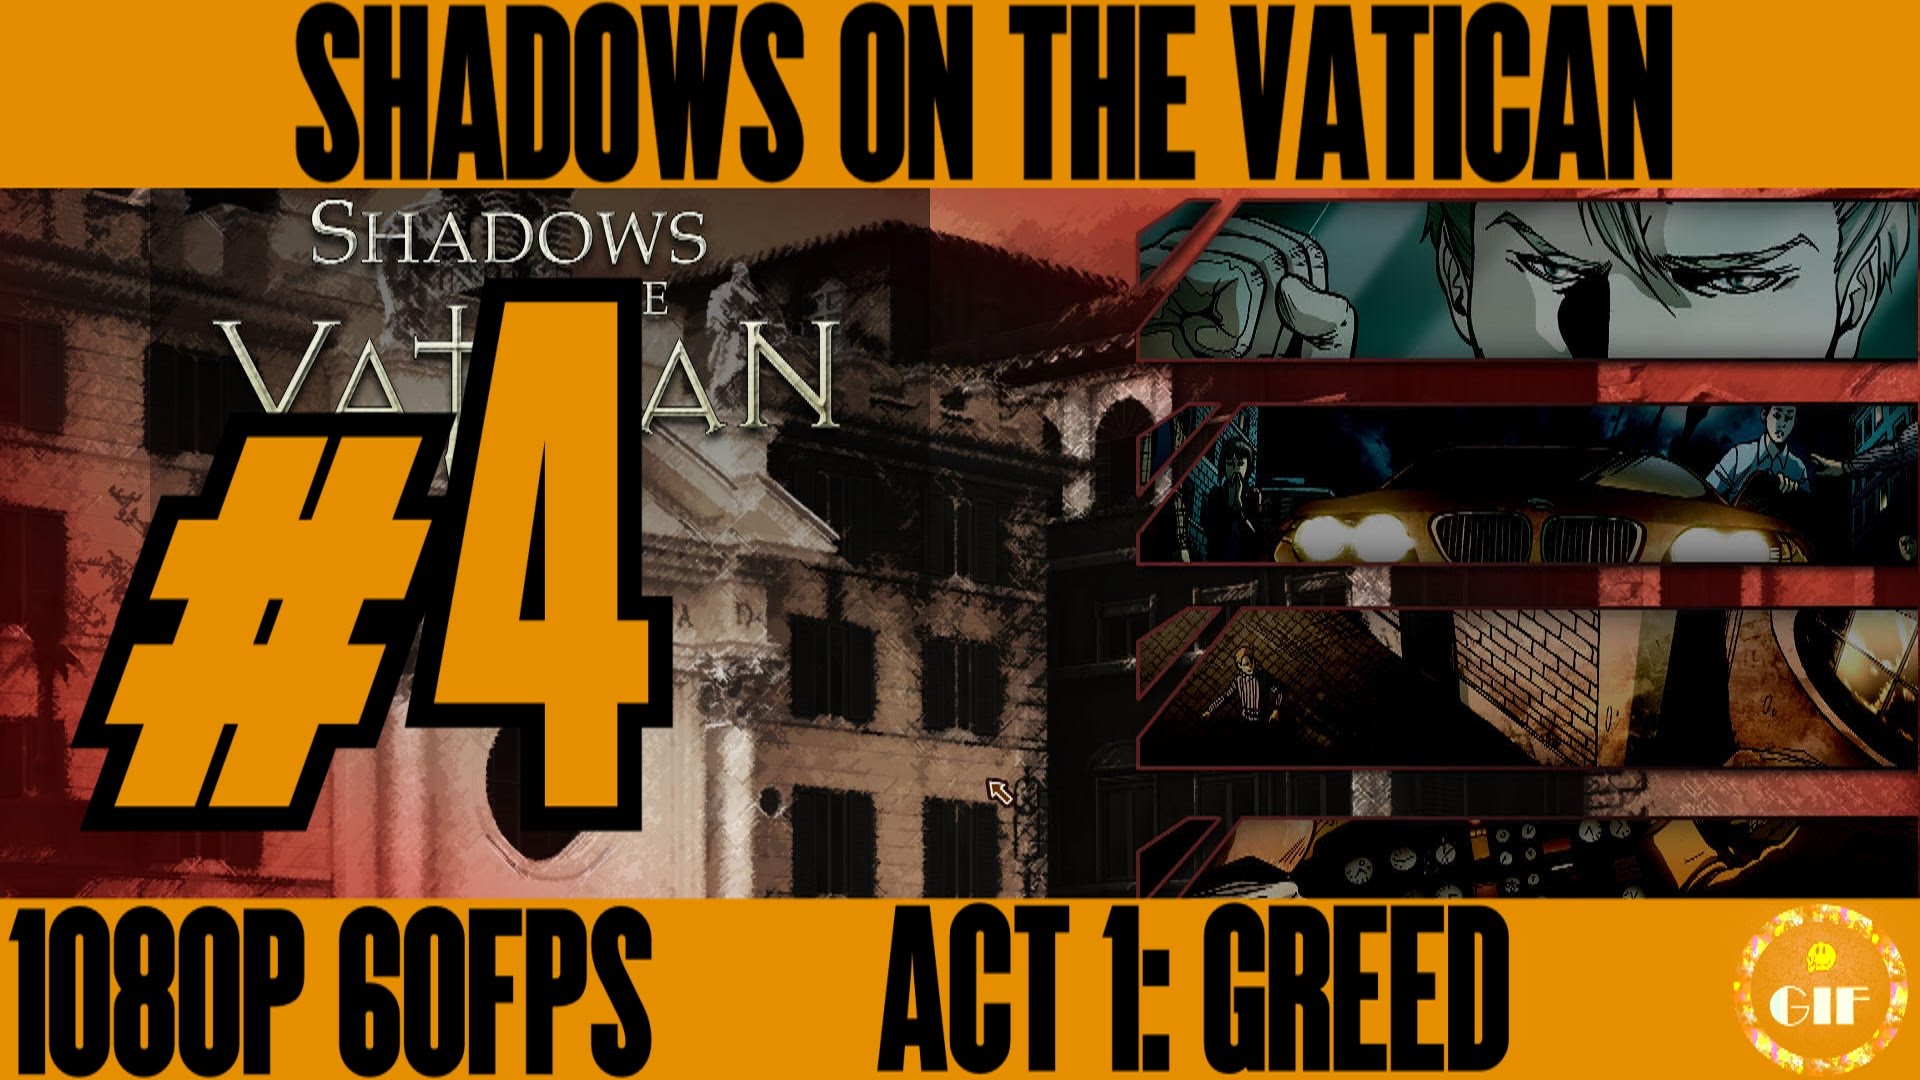 Shadows On The Vatican - Act I: Greed #20